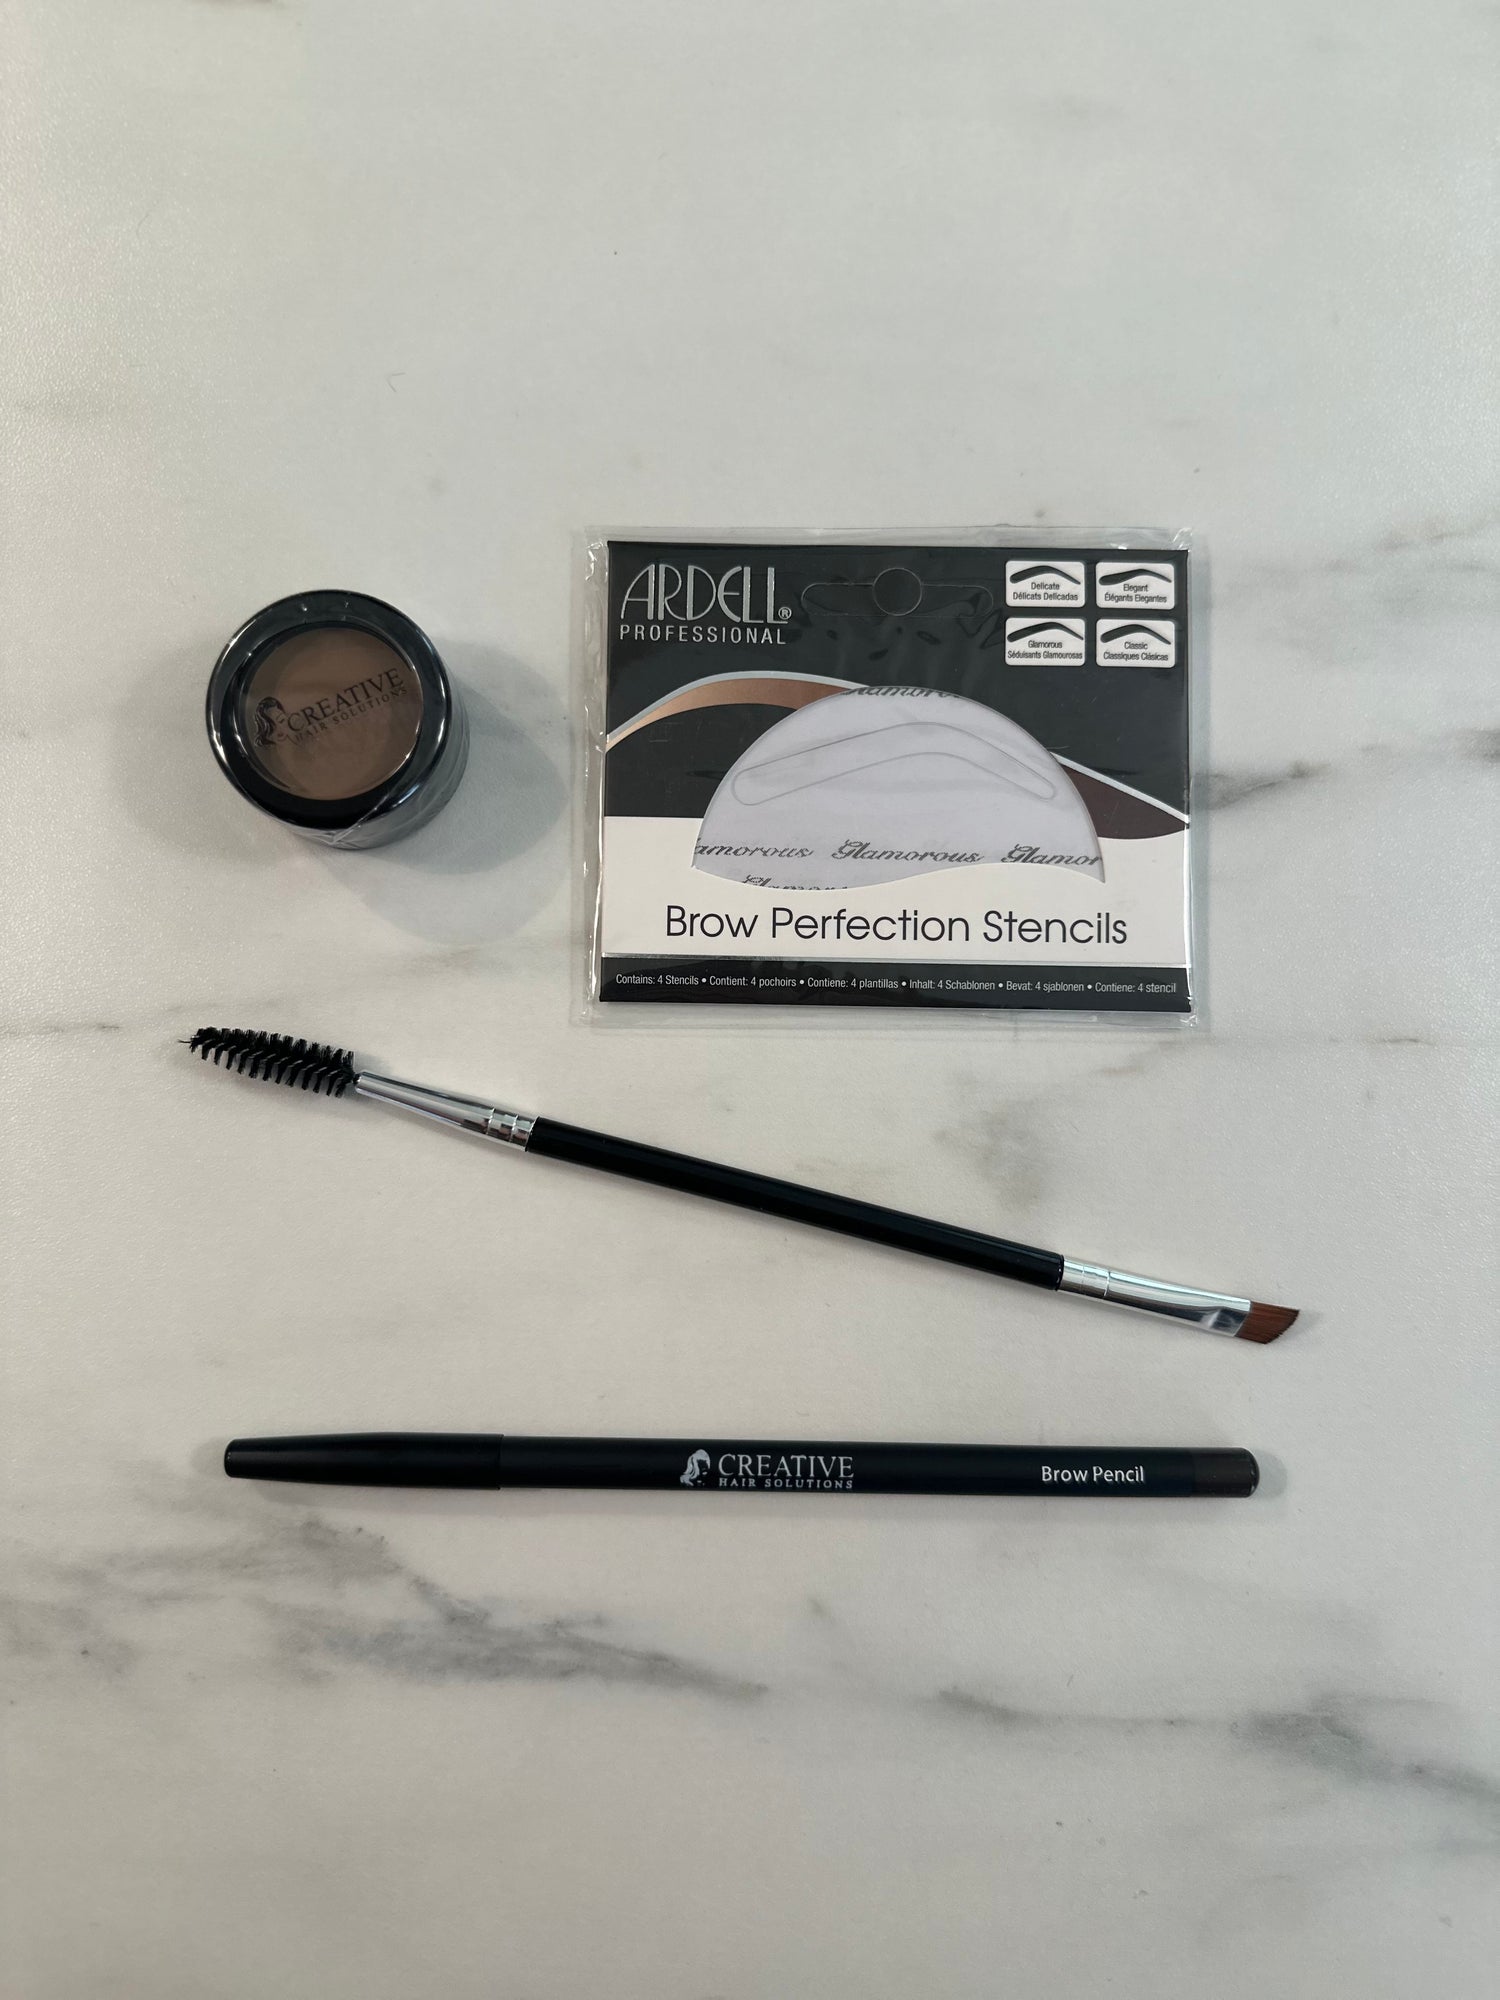 Brow products